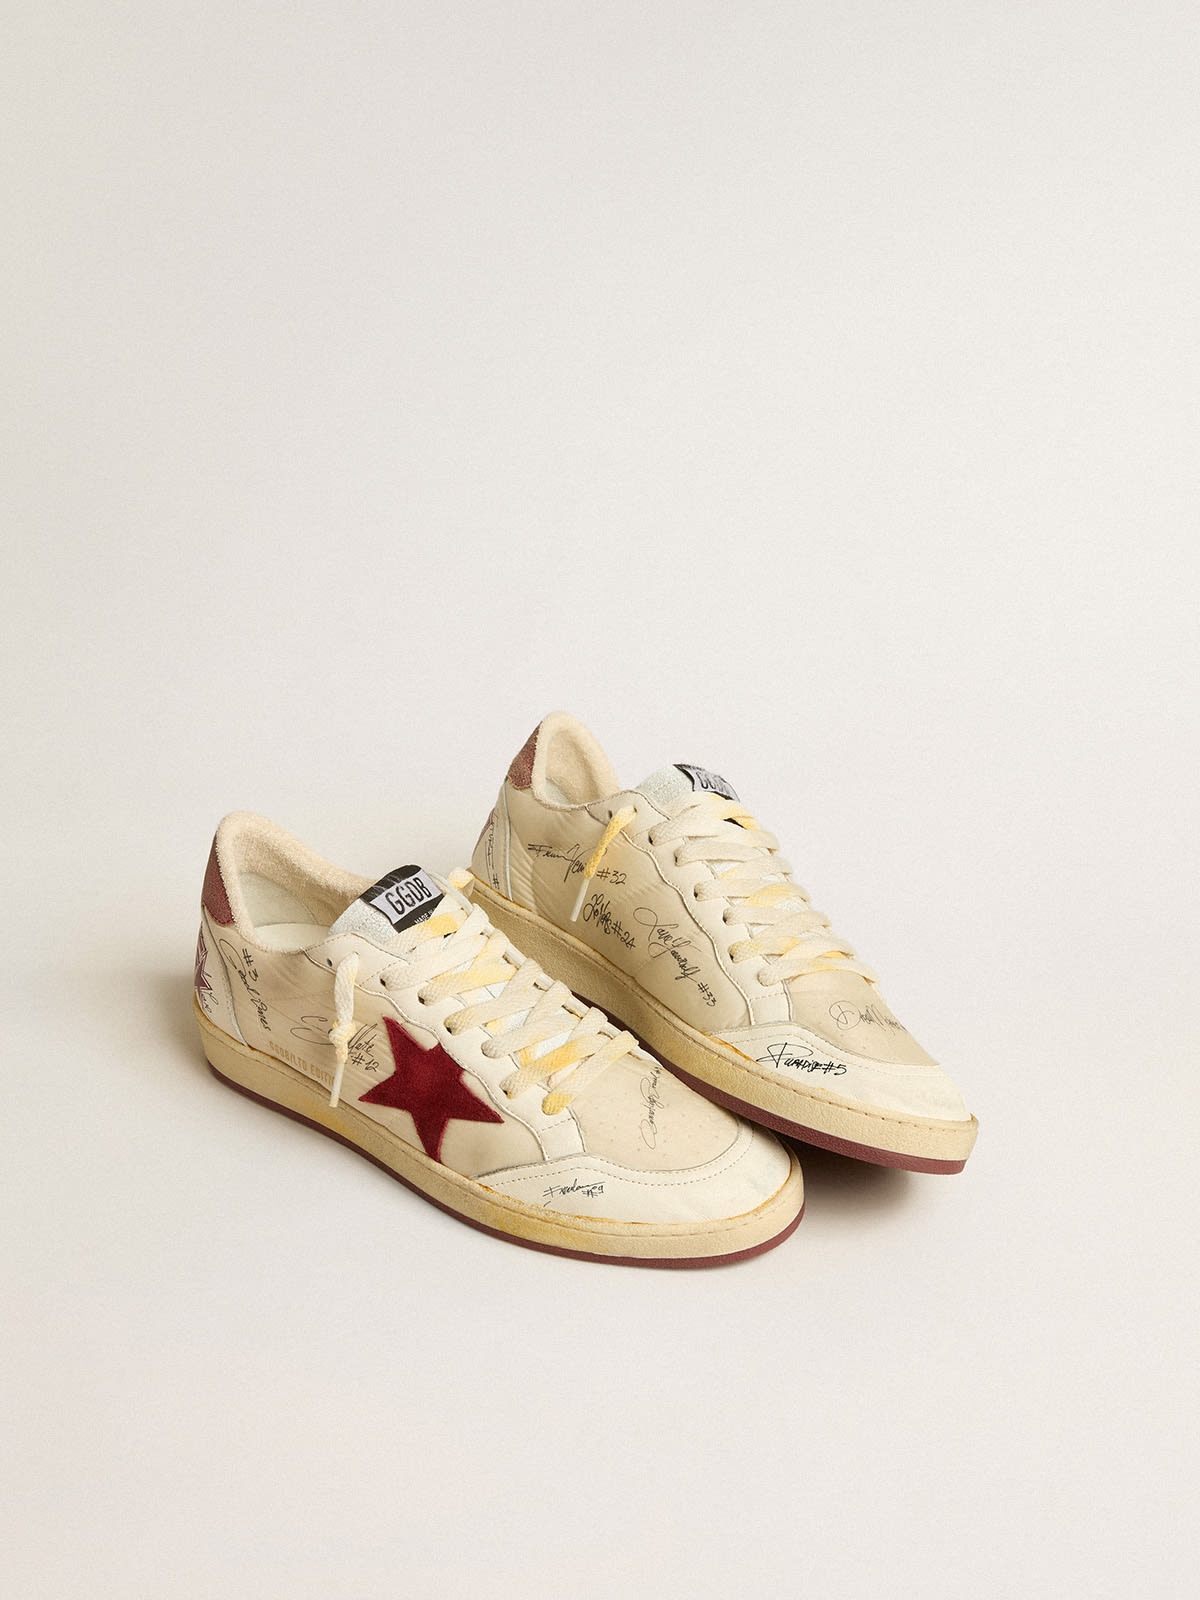 Ball Star LTD in nylon with pomegranate suede star and leather heel tab - 2